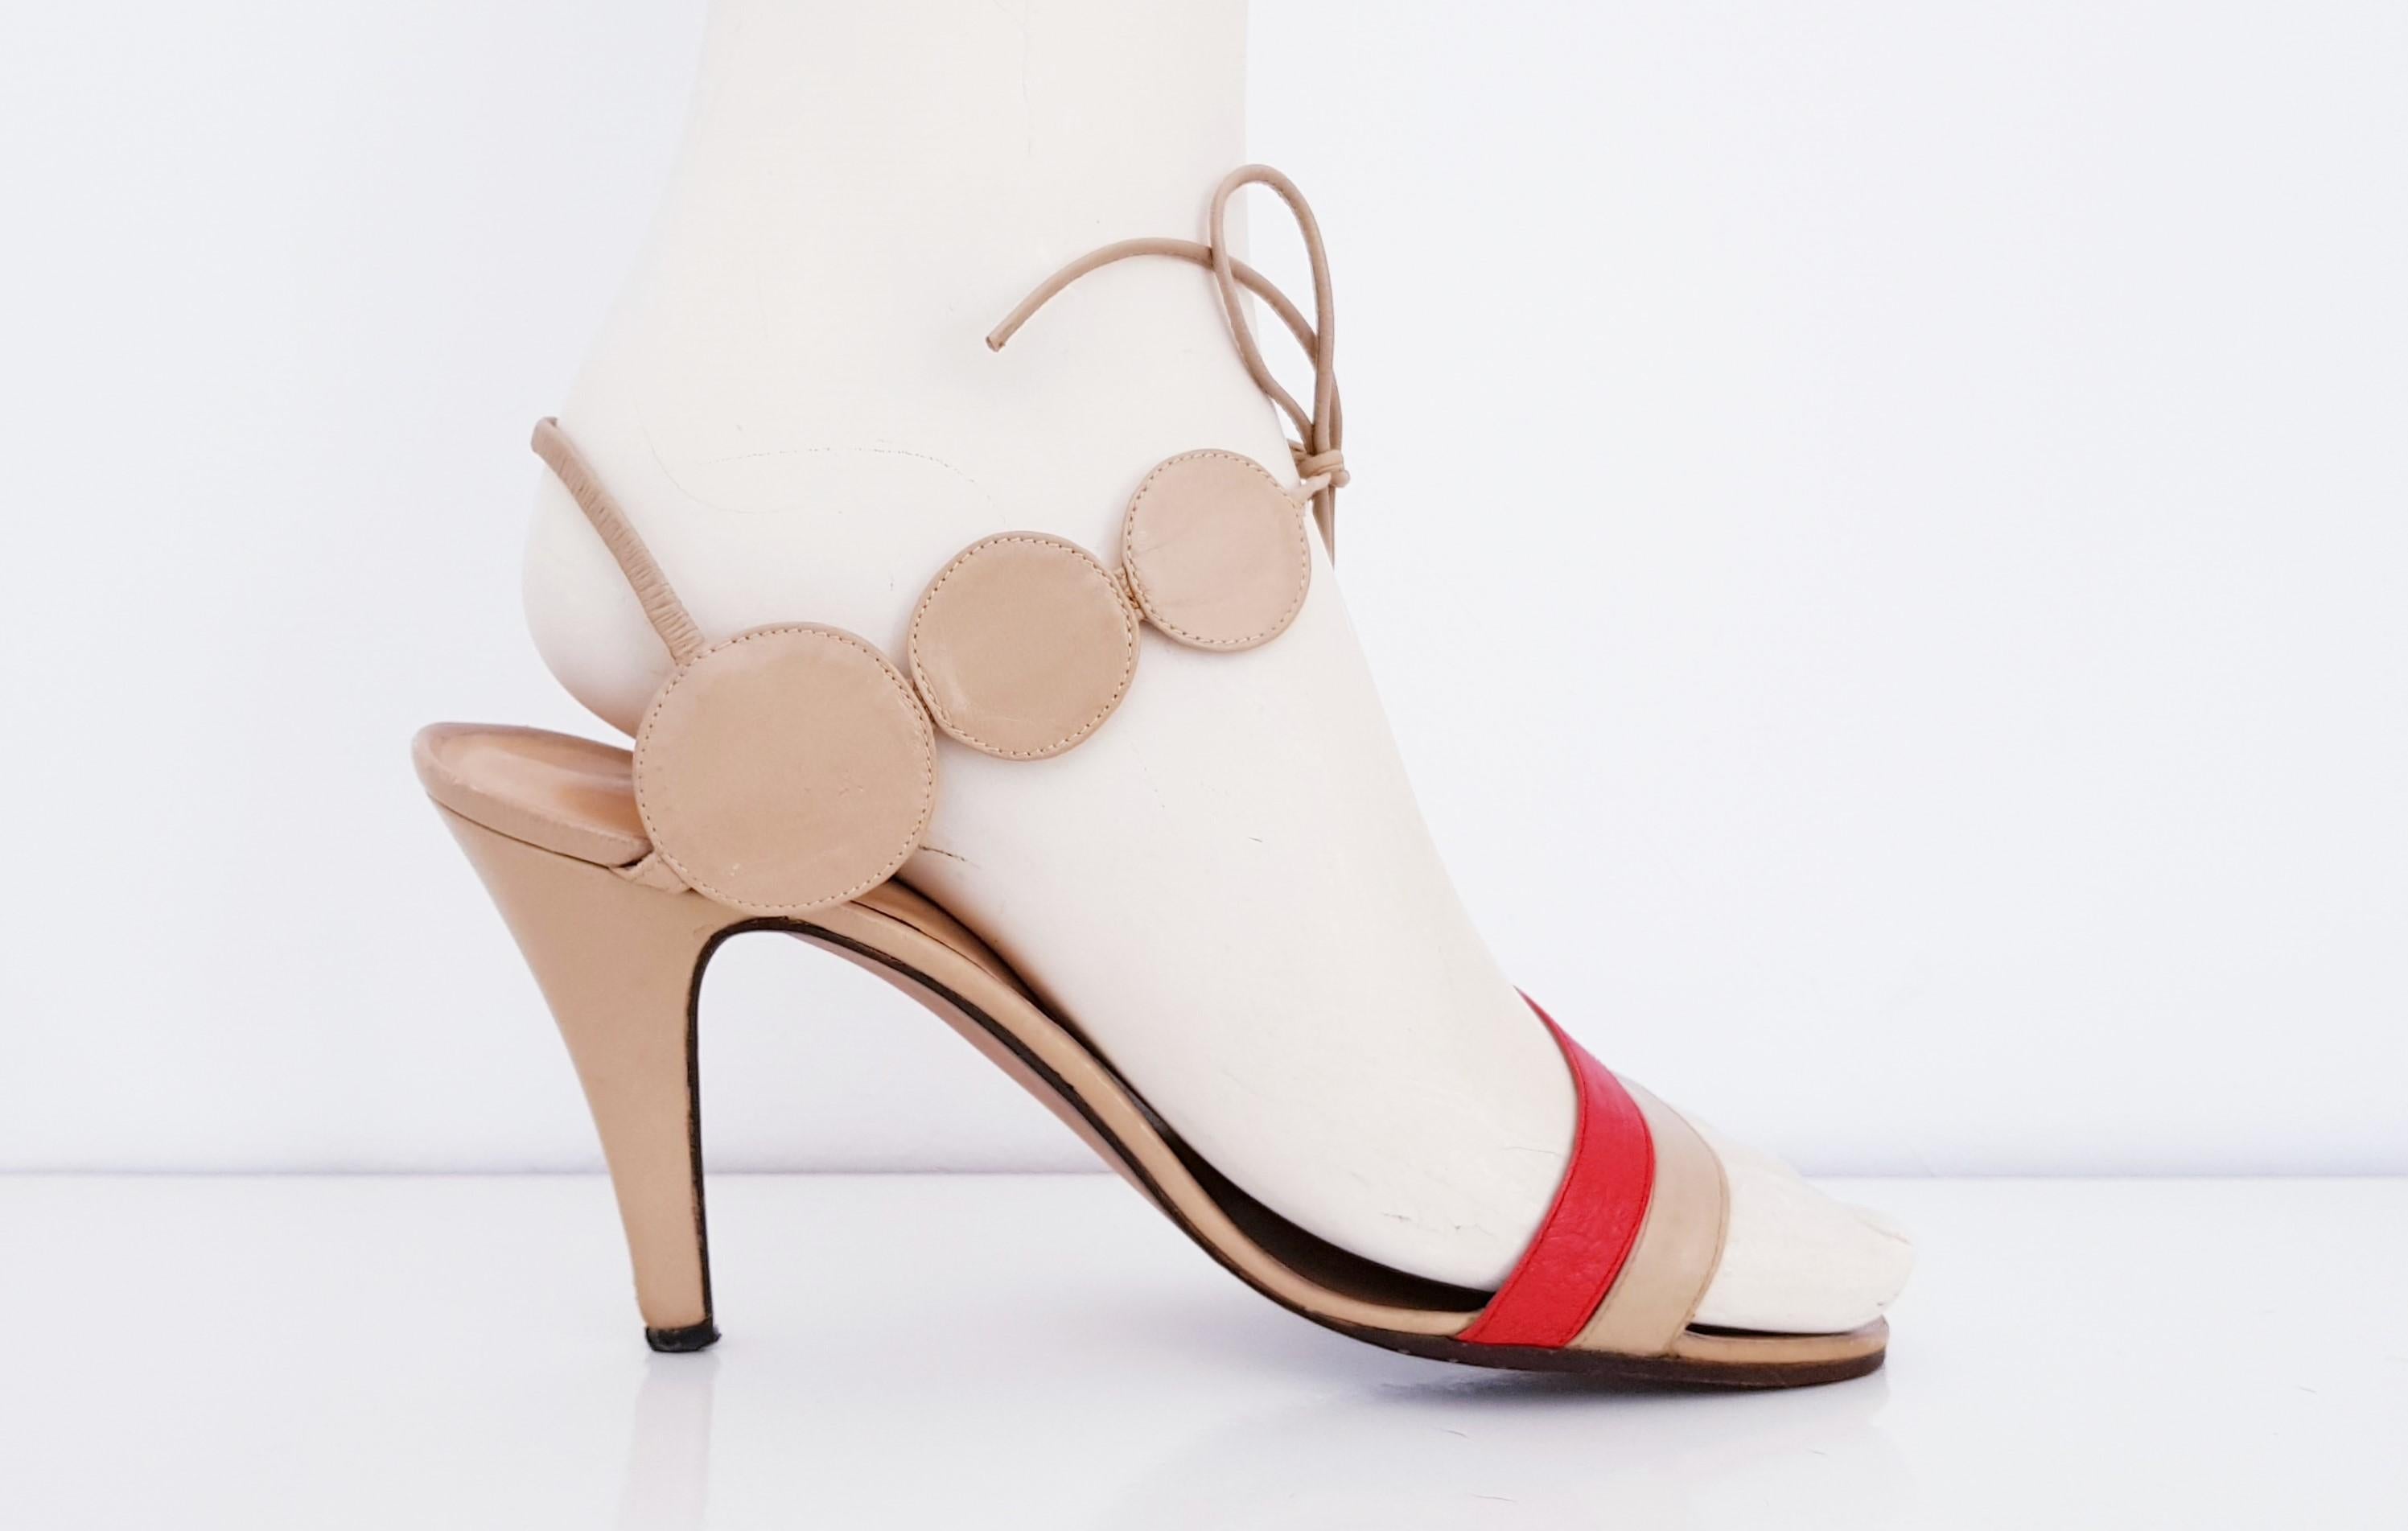 Gray Dalco' Roma for Valentino Open High Heels circular red/beige design. Size 39 1/2 For Sale